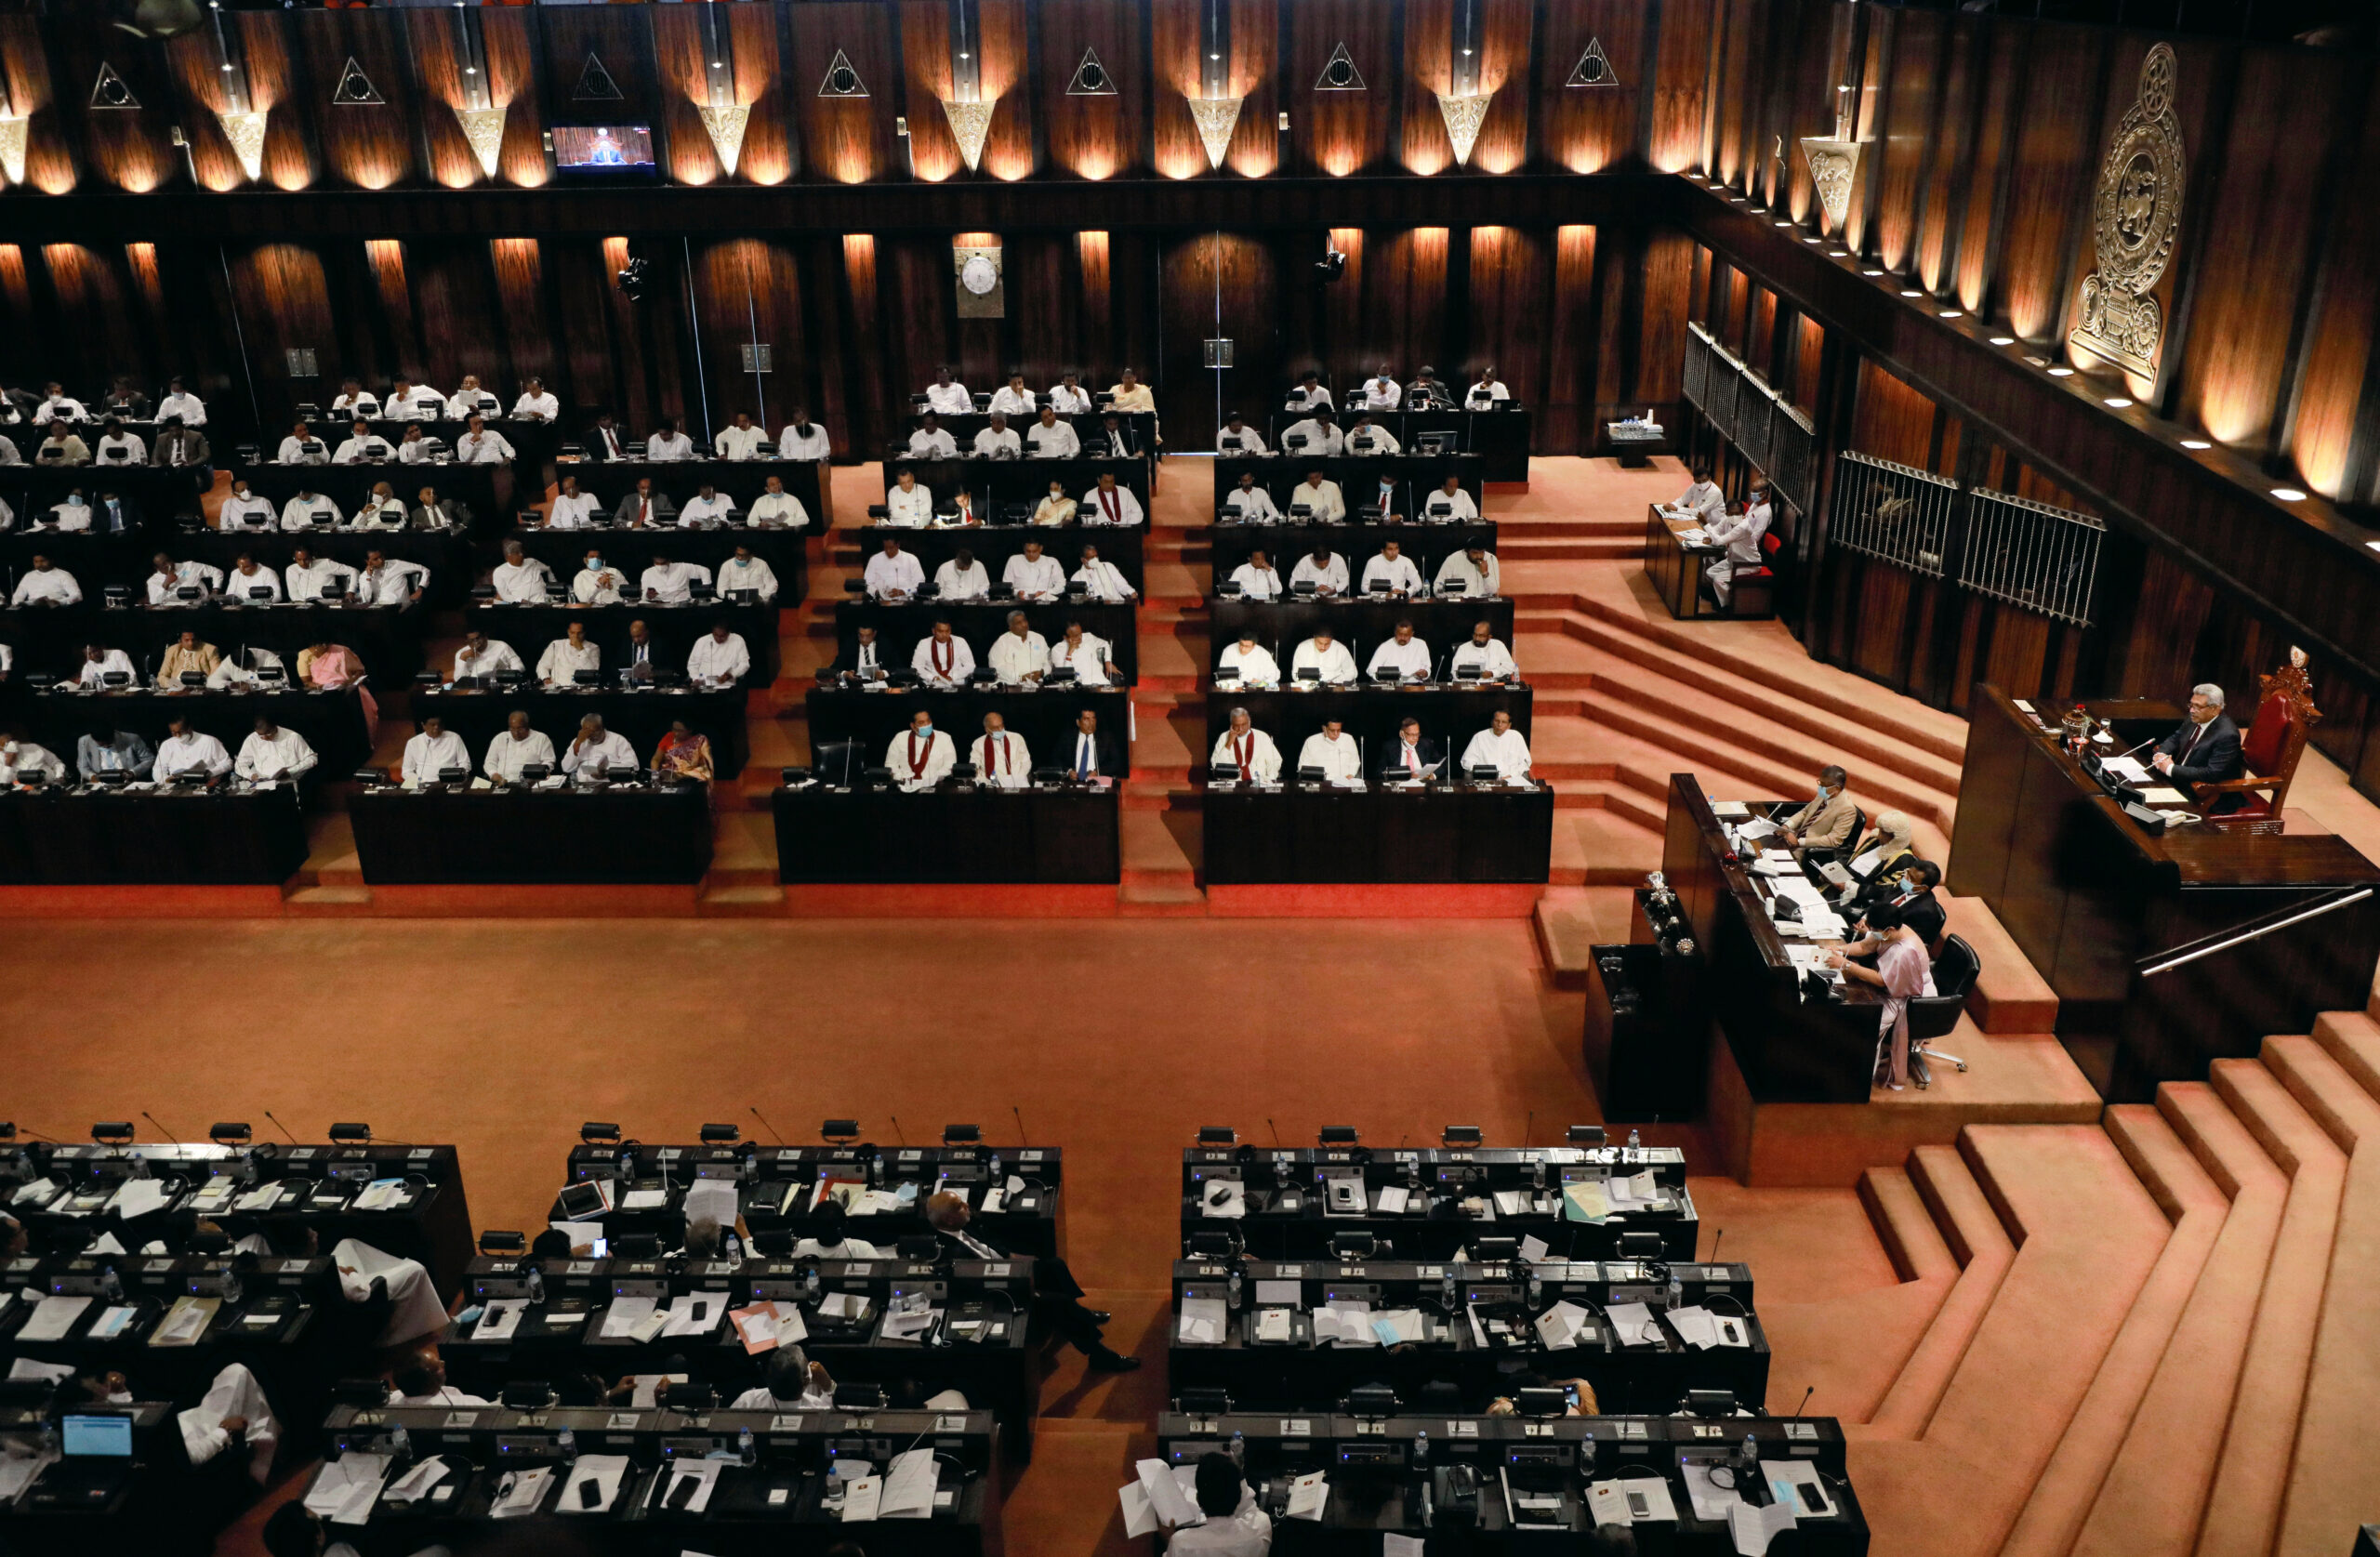 Development of a new Action Plan for the Parliament of Sri Lanka